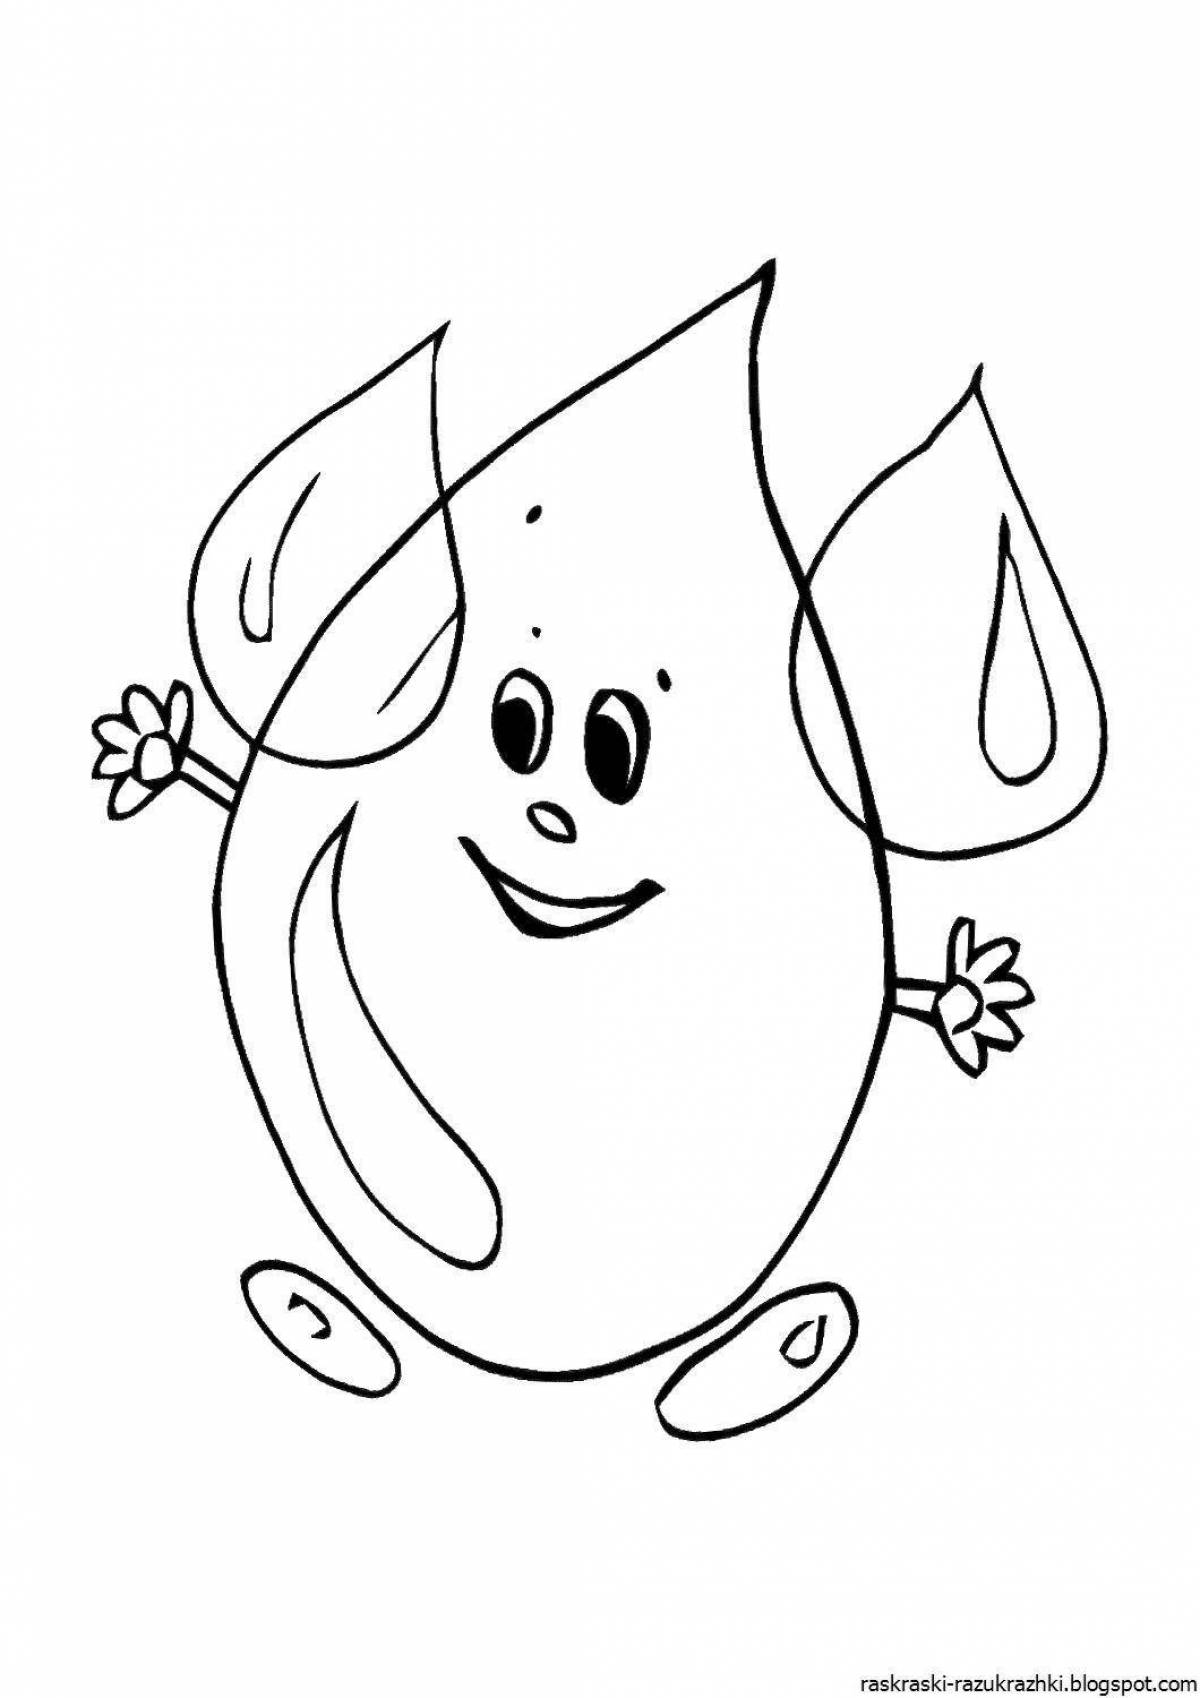 Animated drop coloring page for kids